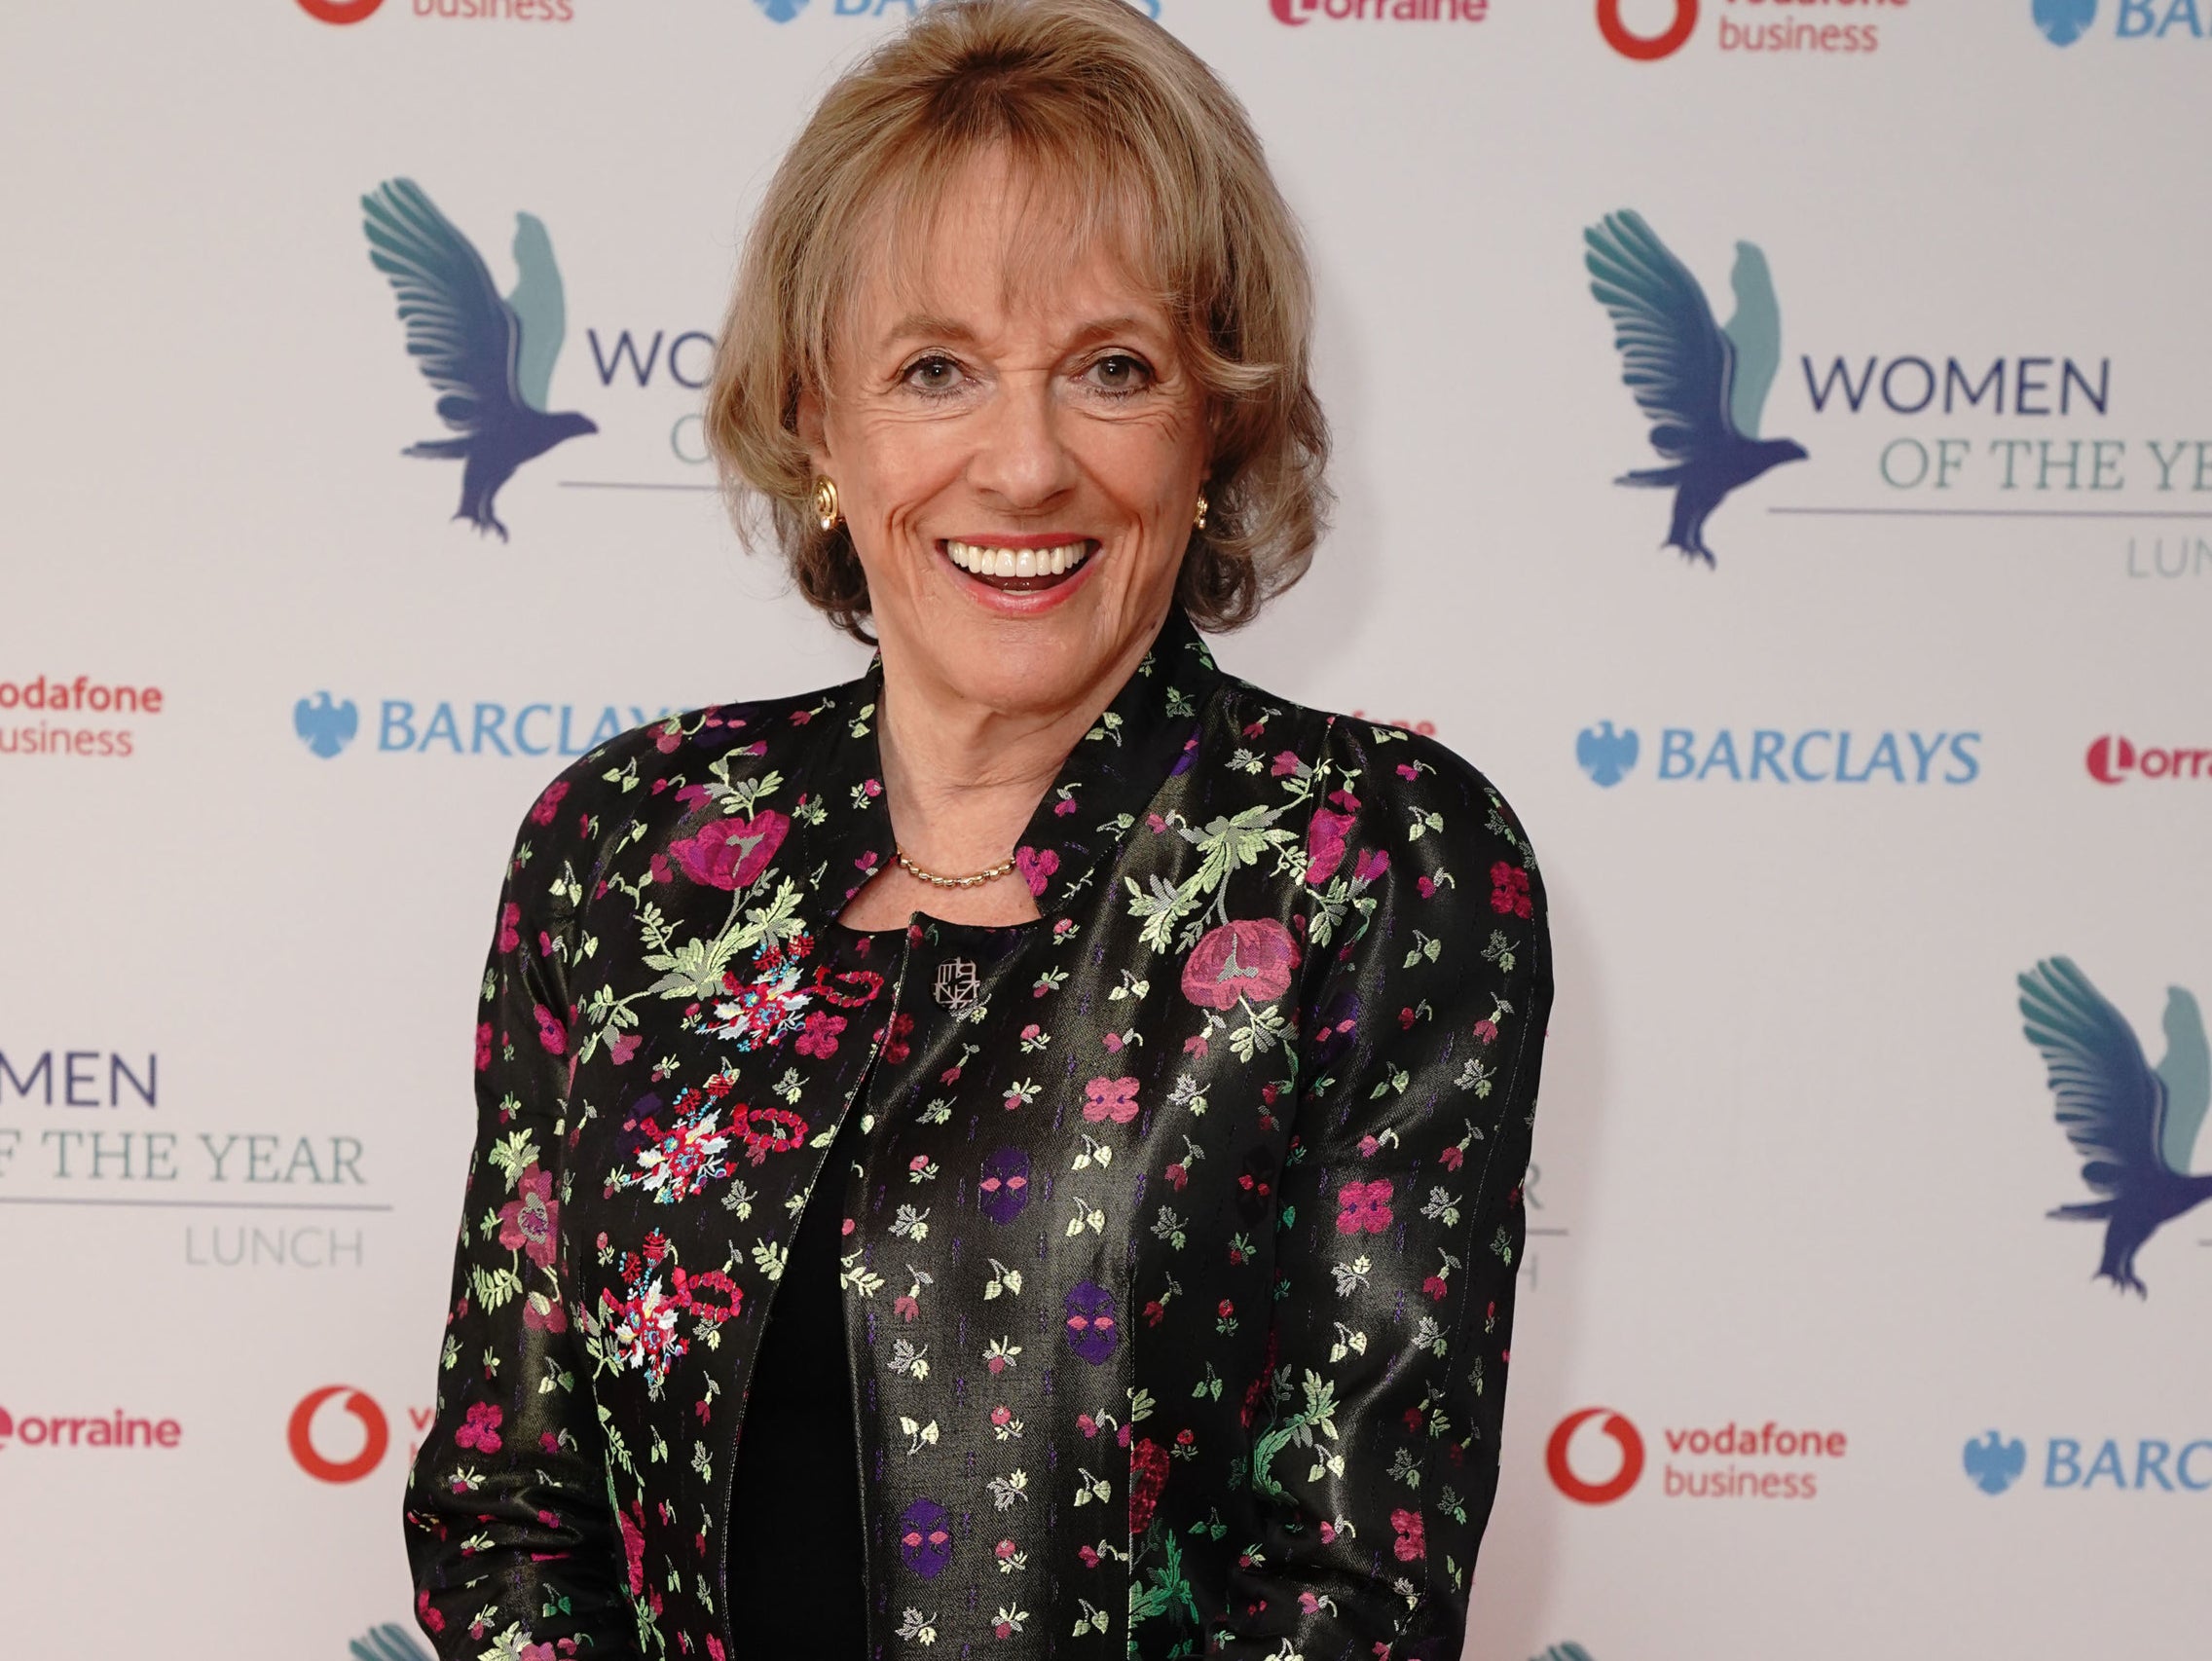 Dame Esther Rantzen who has said she is considering the option of assisted dying